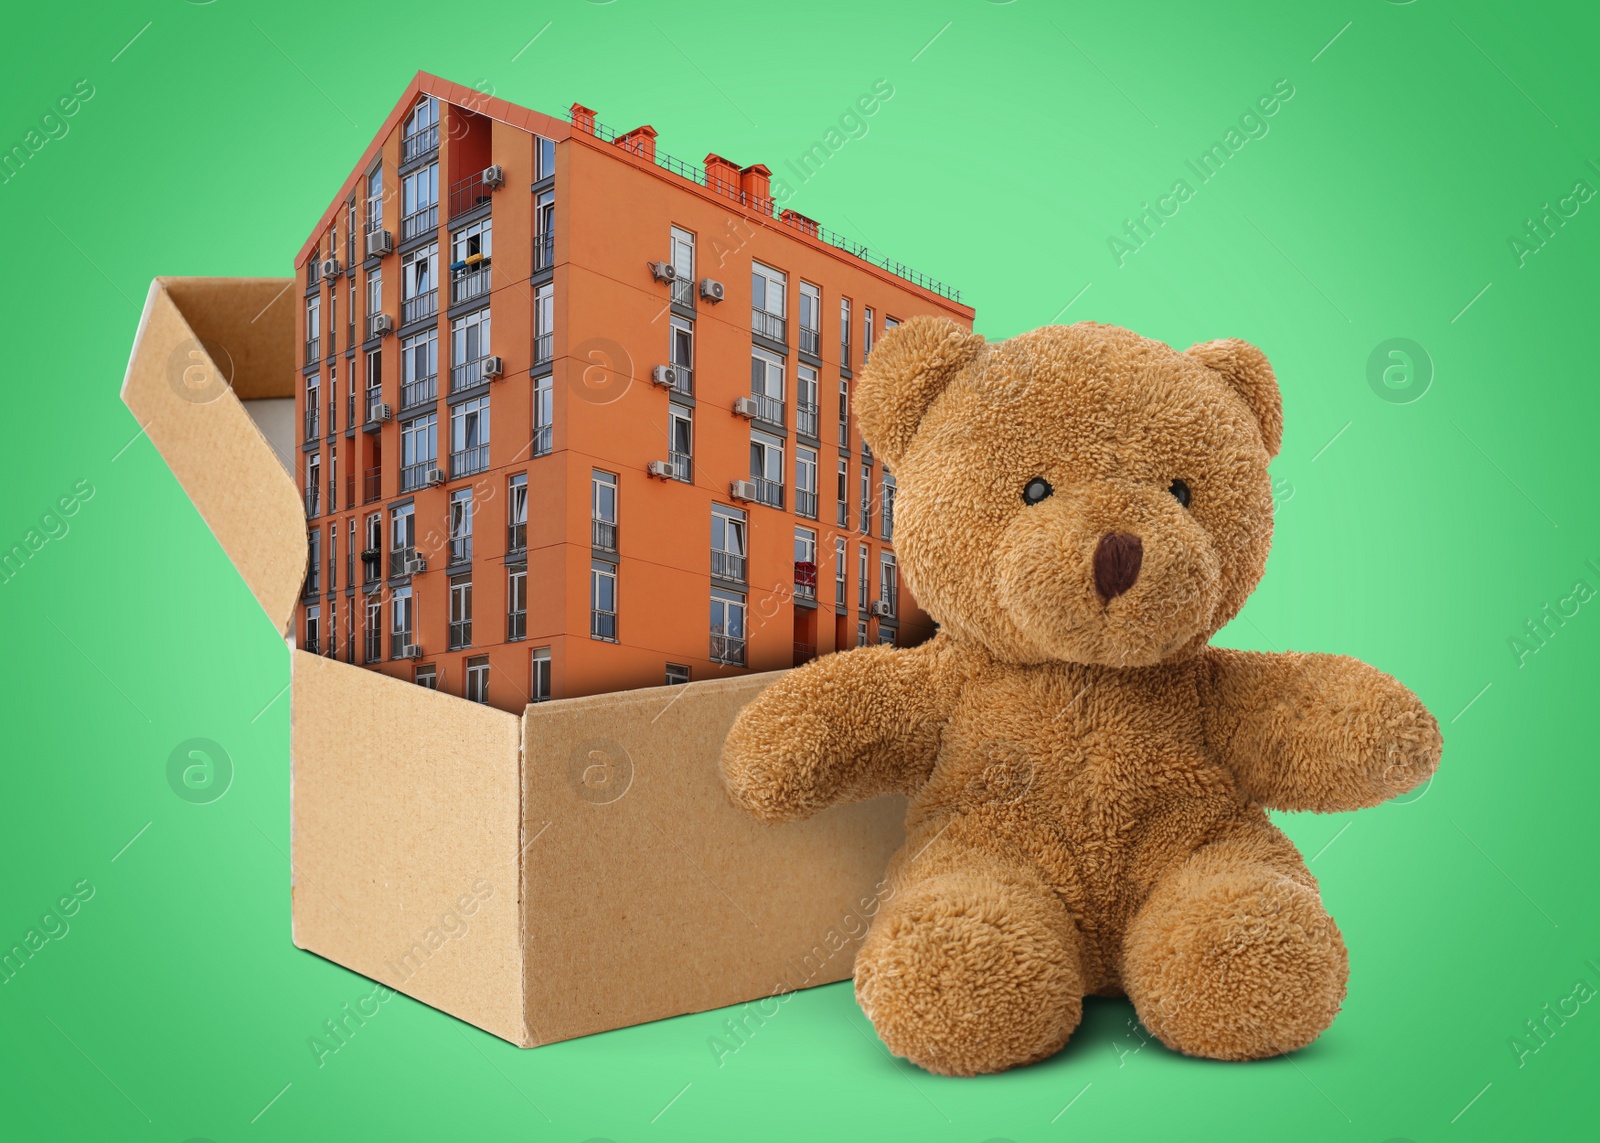 Image of Cute toy bear near cardboard box with building on green background